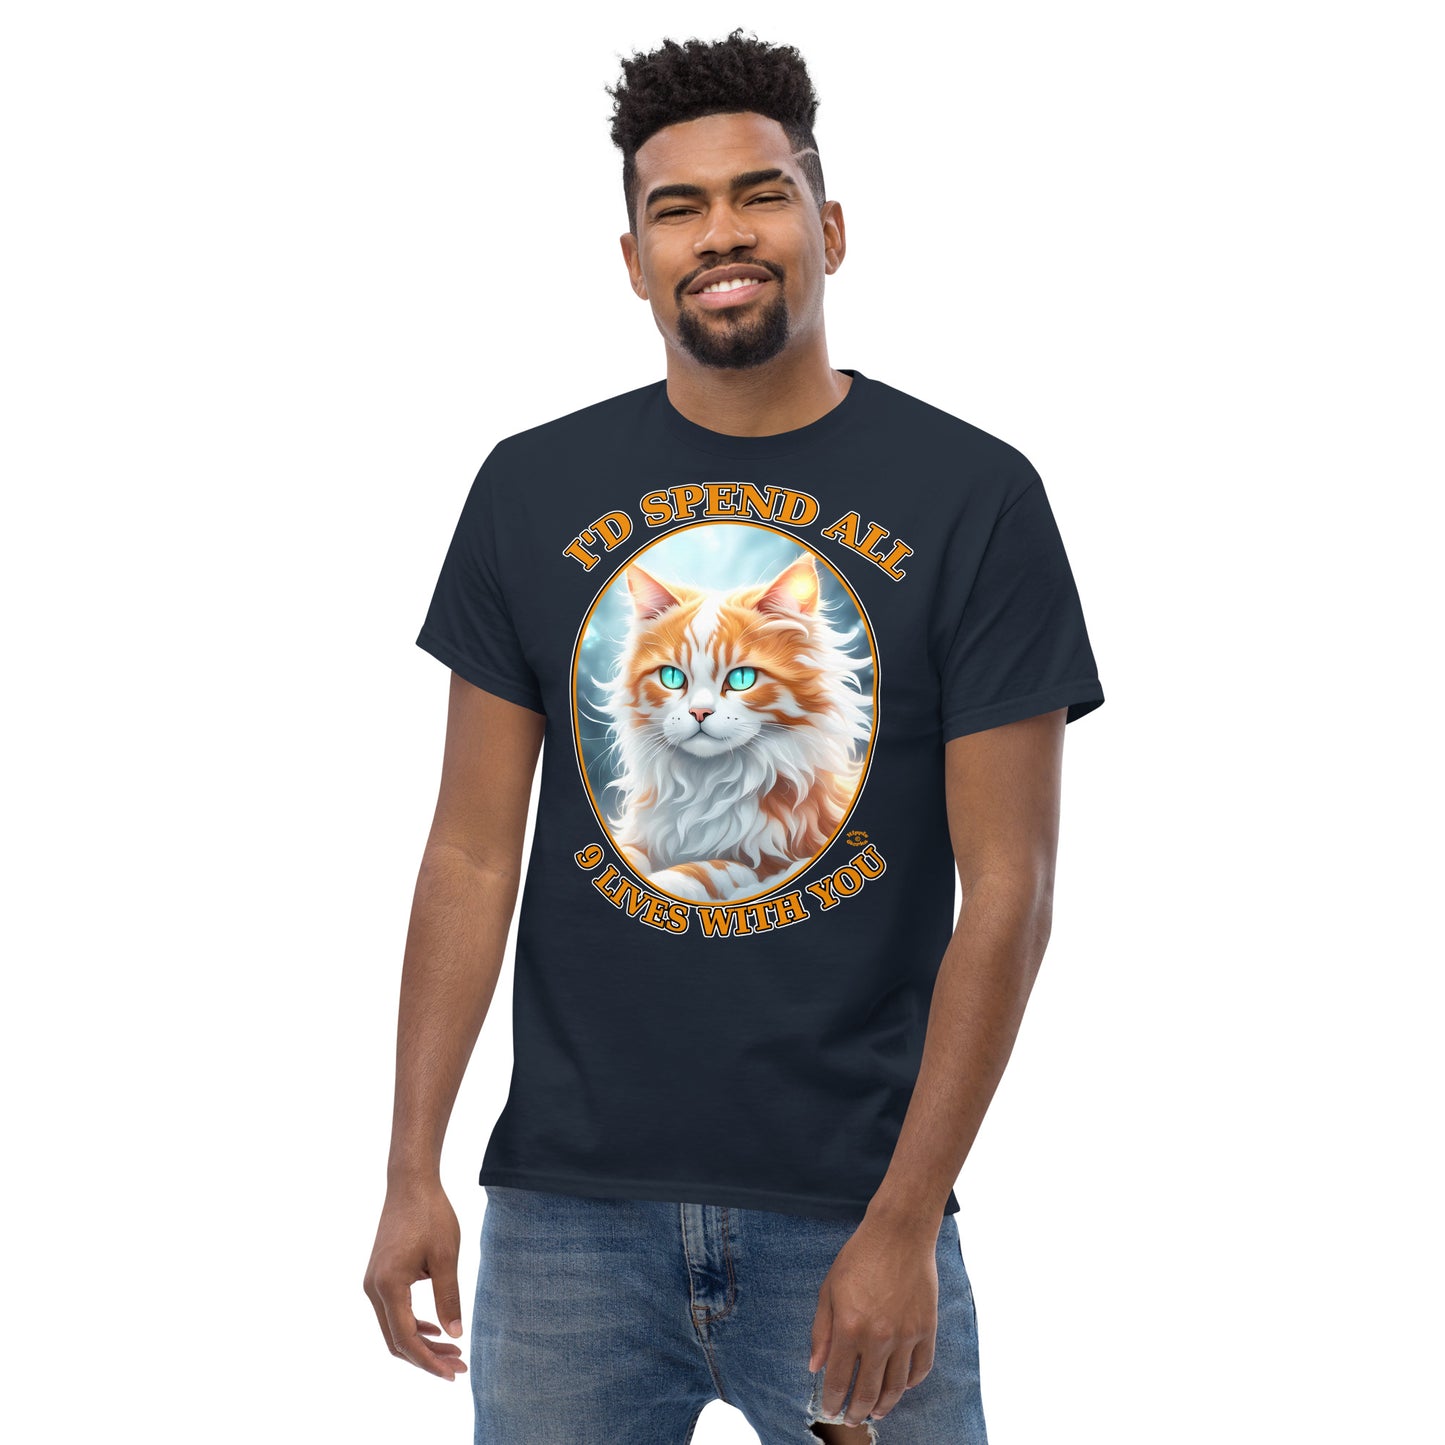 "I'd Spend All 9 Lives With You" Men's Classic Tee